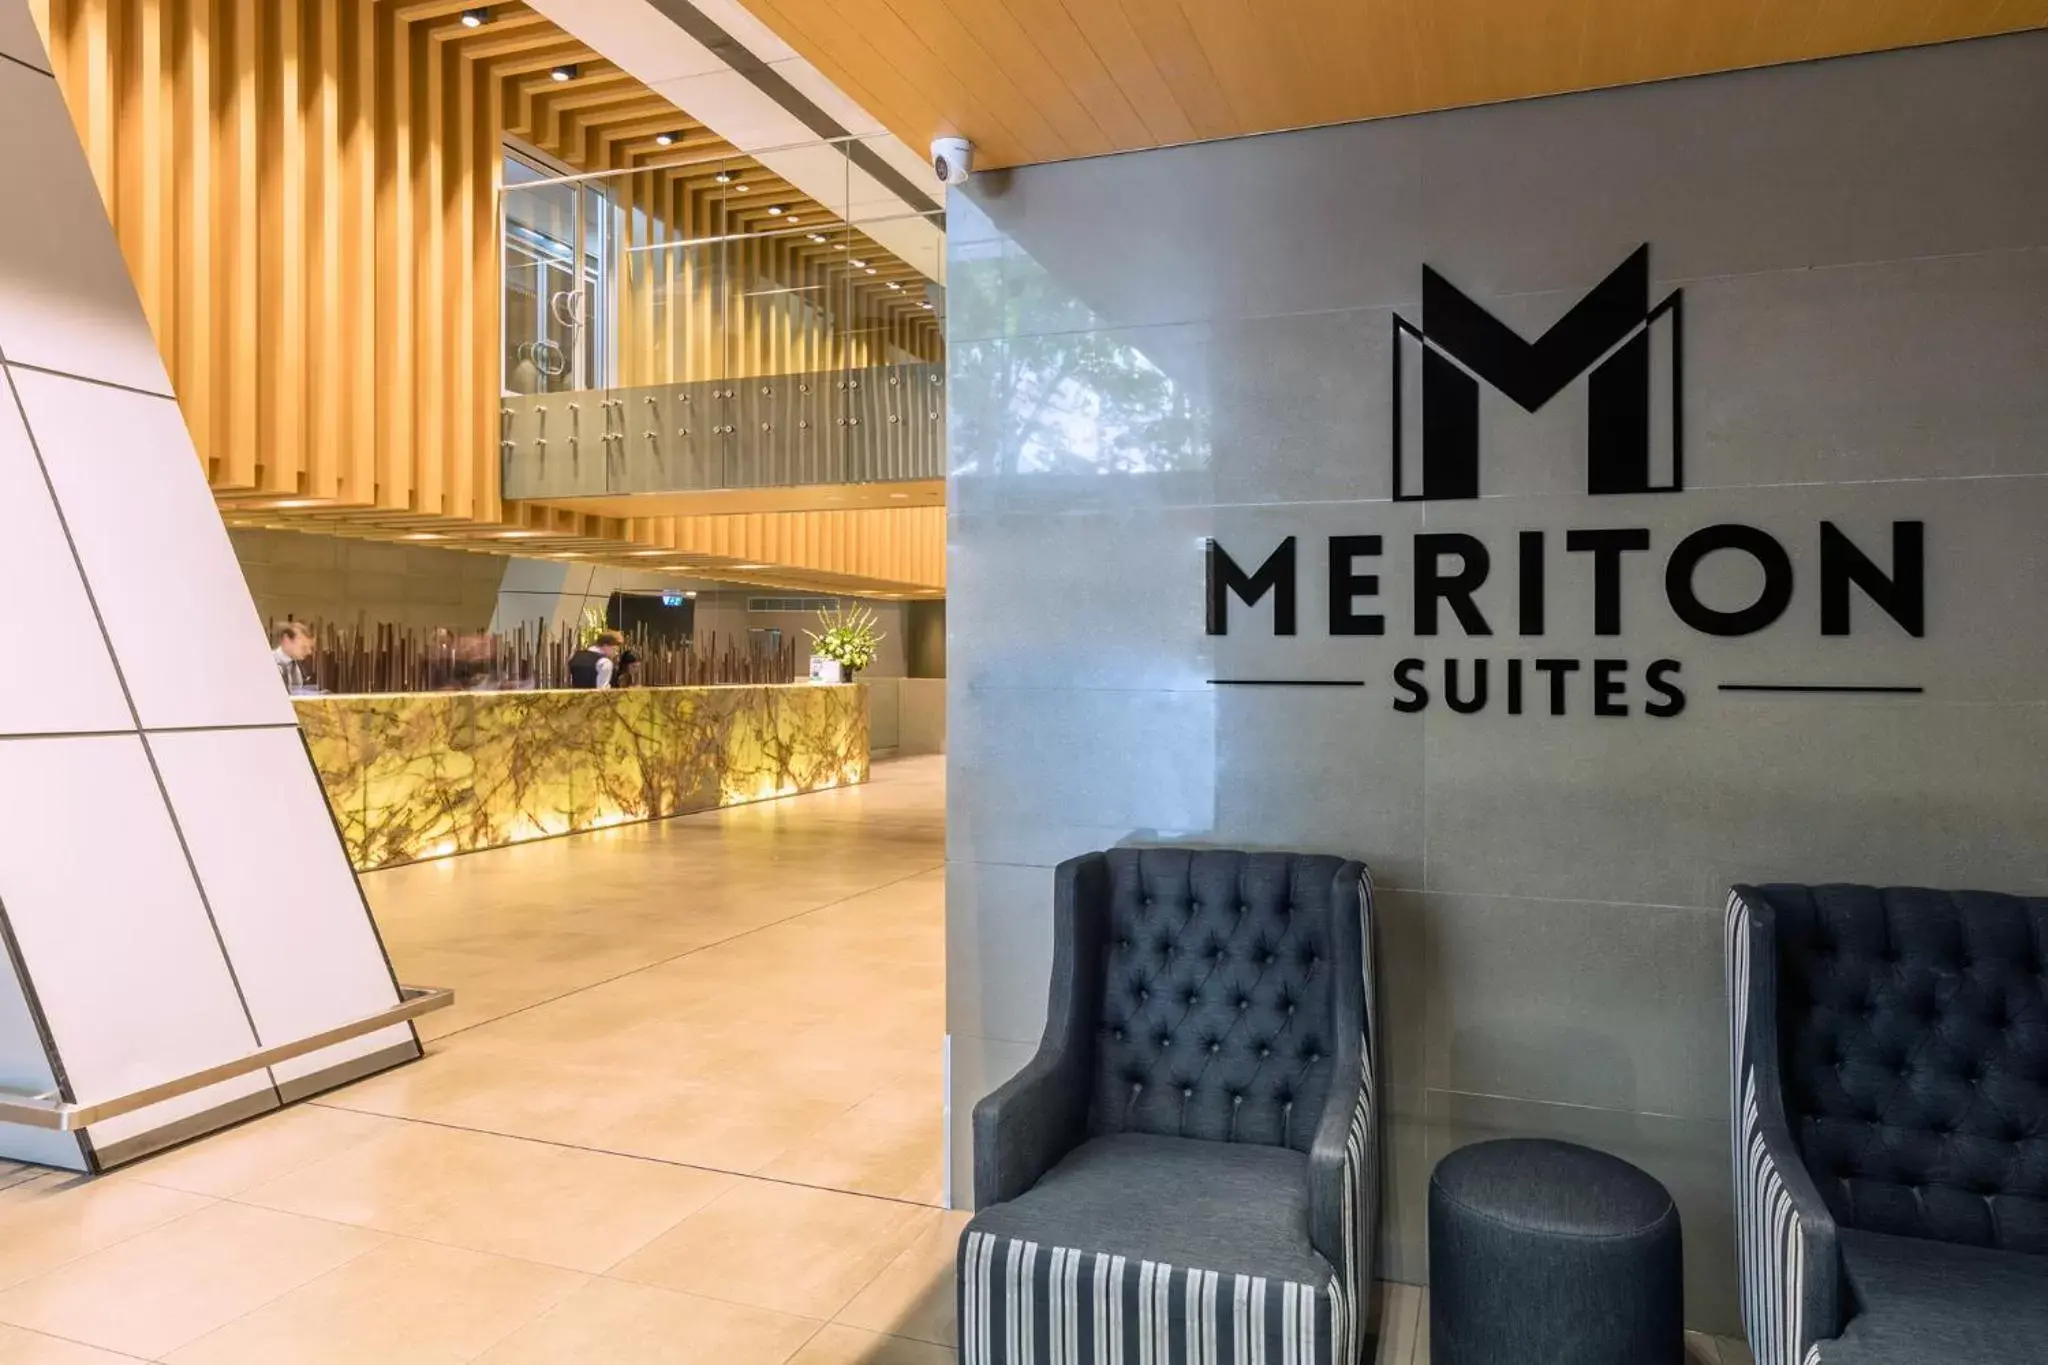 Property logo or sign in Meriton Suites World Tower, Sydney